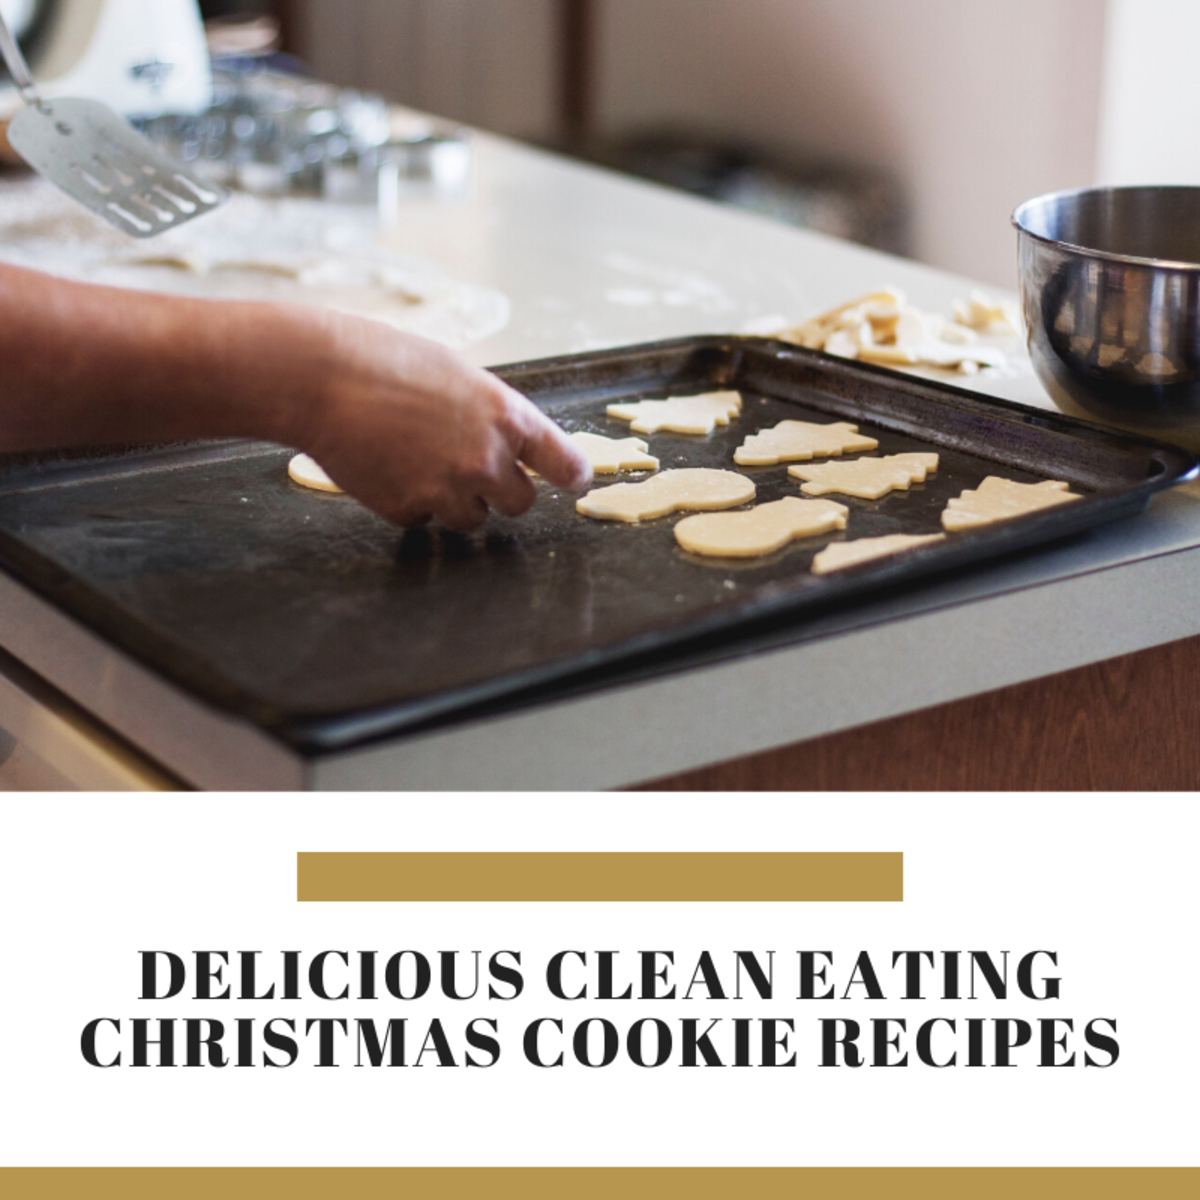 12 Delicious Clean-Eating Christmas Cookie Recipes